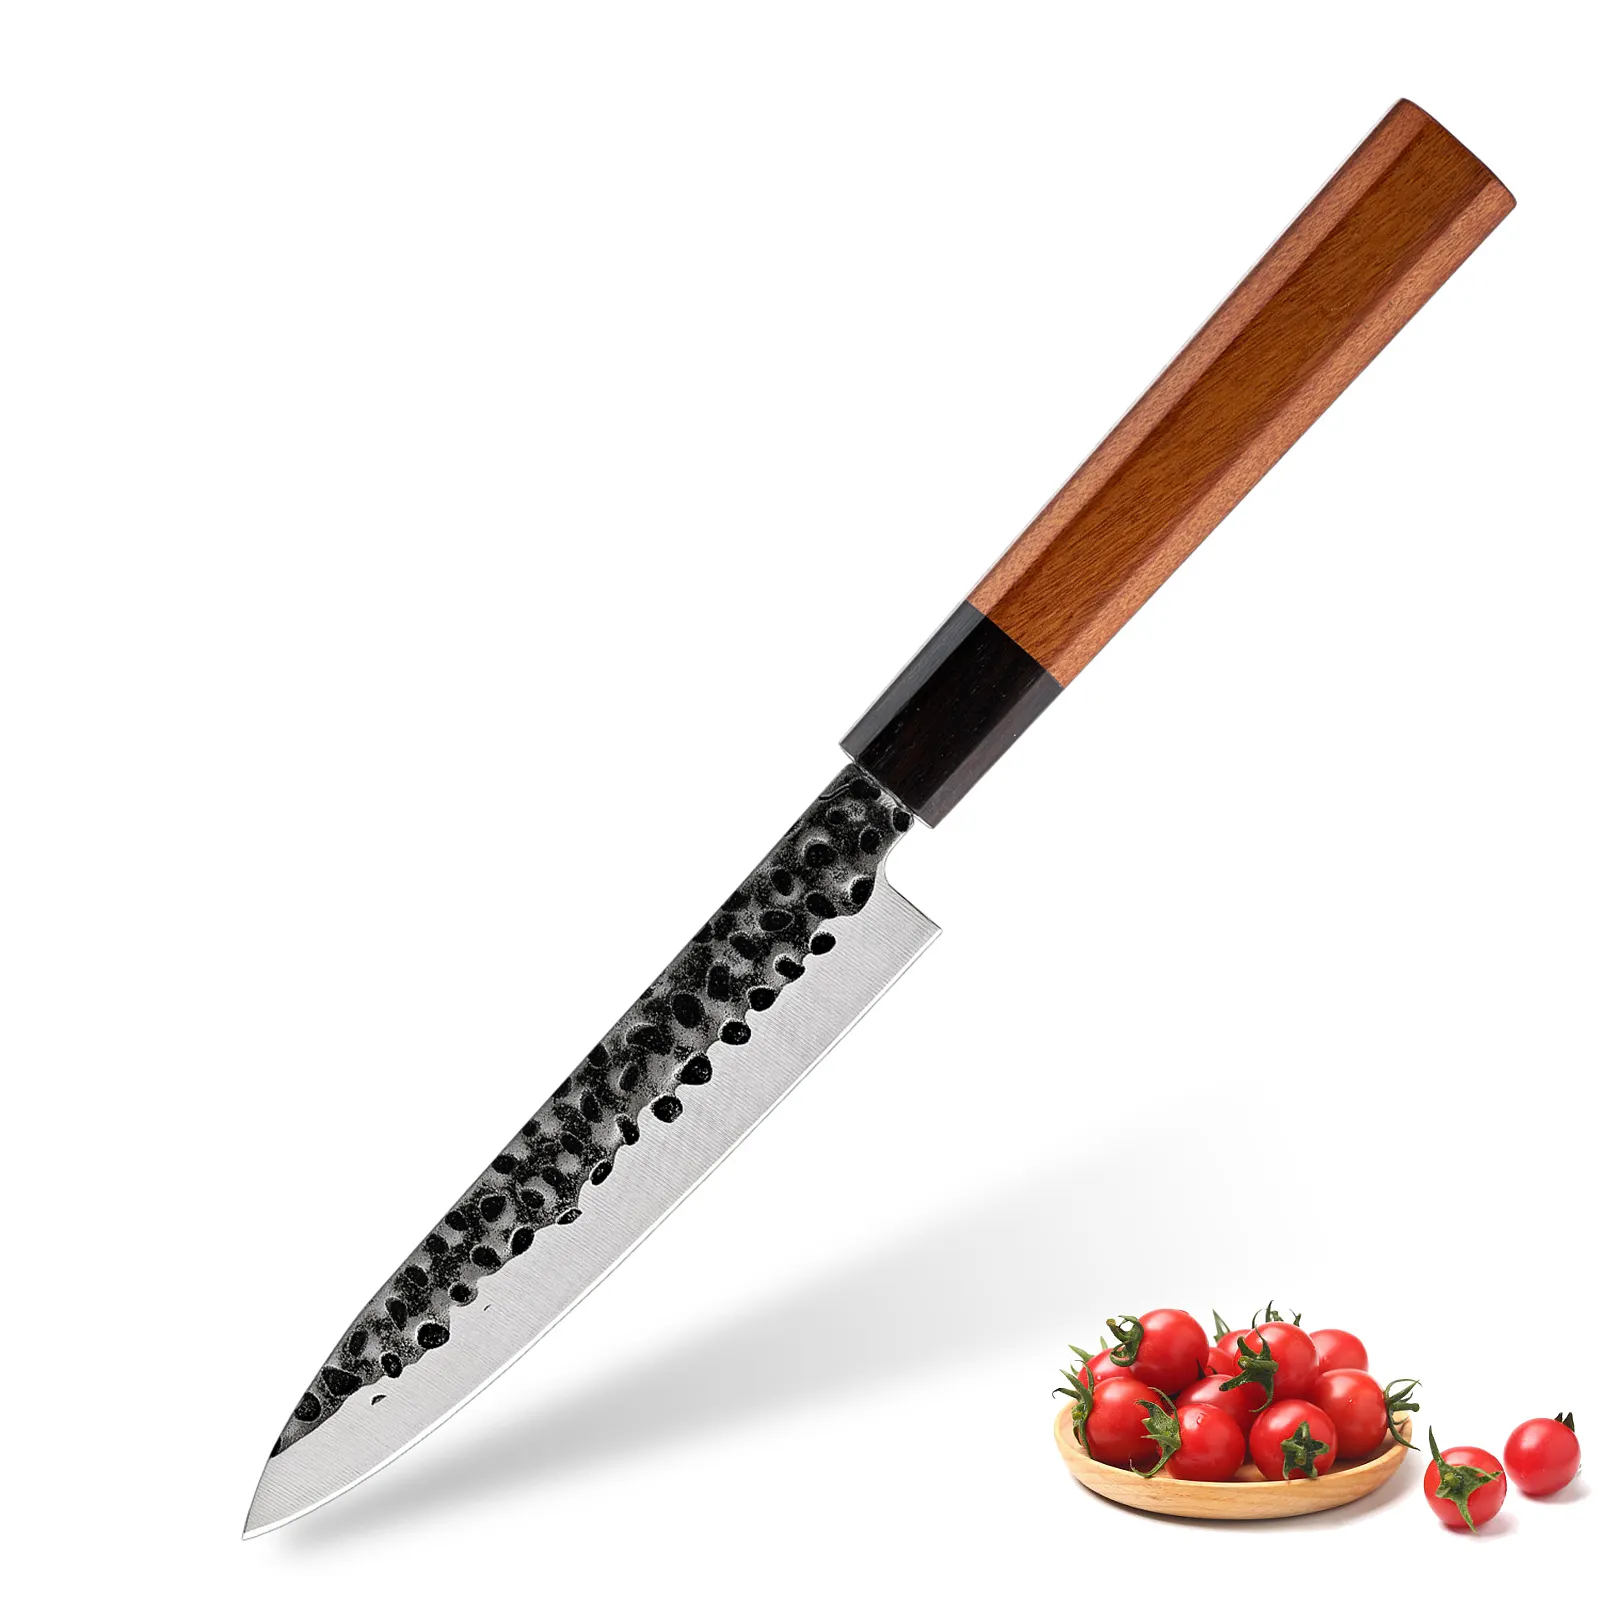 5 Inch Utility Knife Forged Fruit Knife with Octagonal Handle Stainless Steel Chef Knife